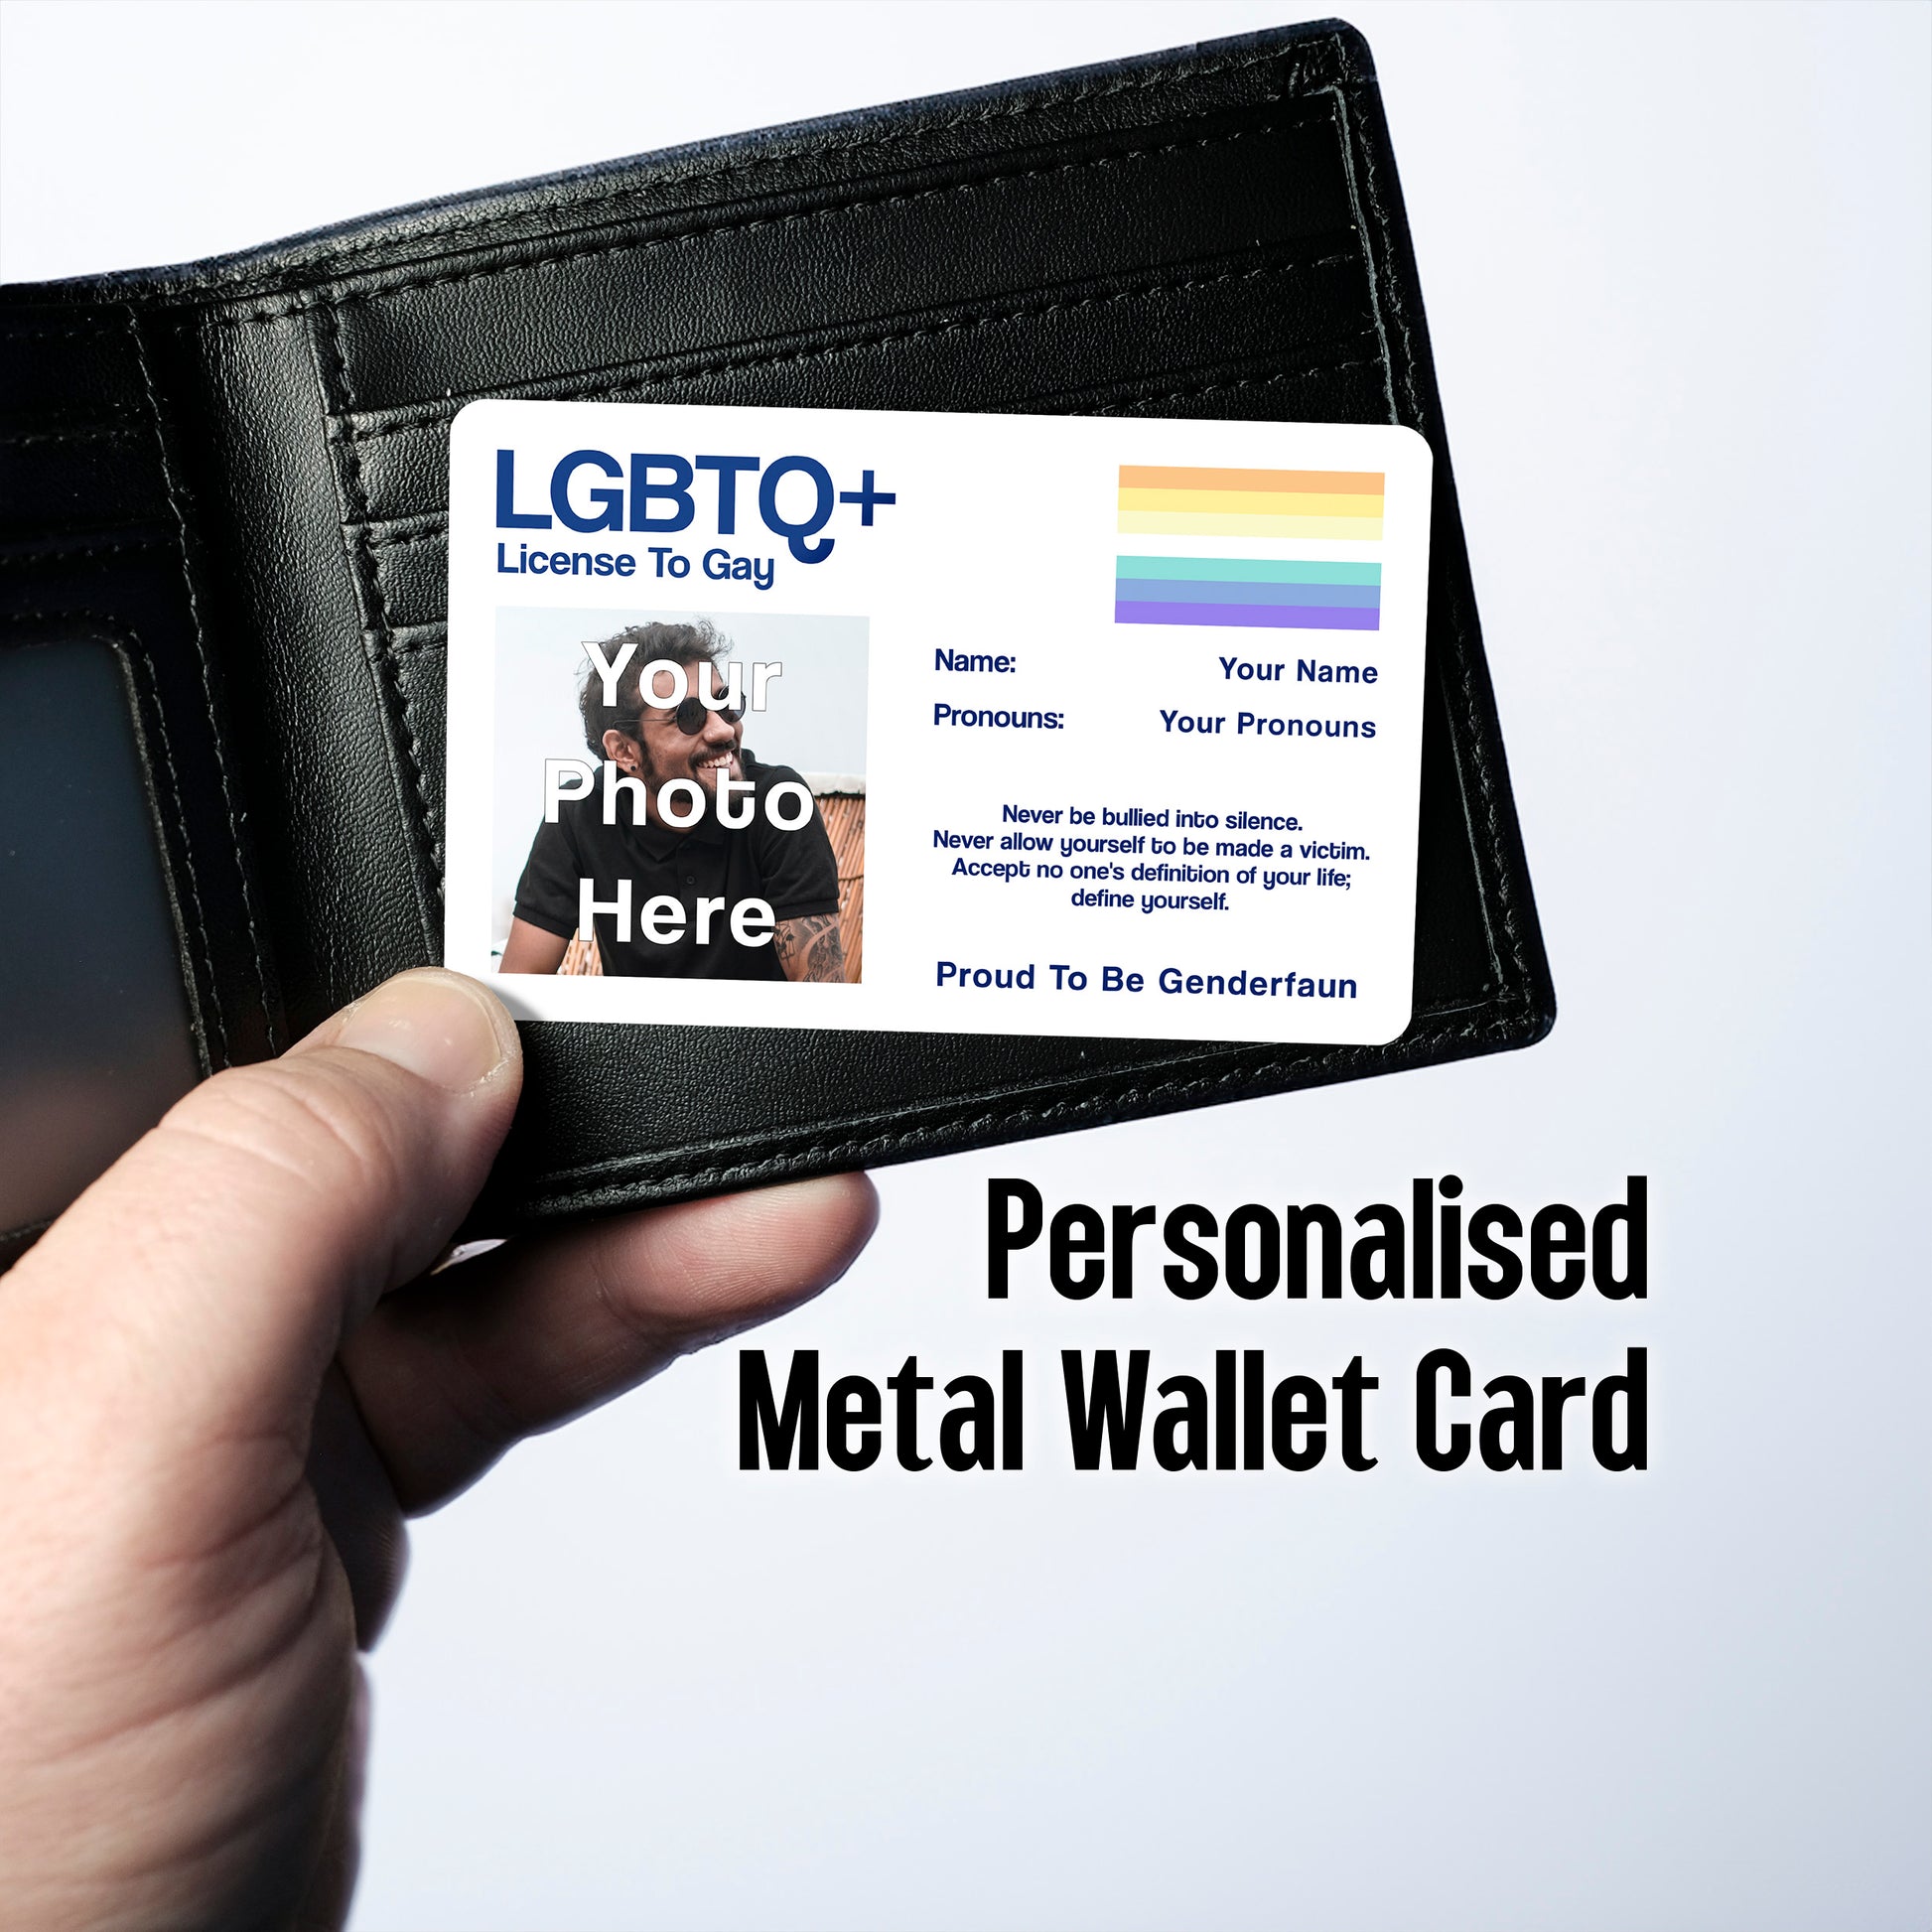 Genderfaun license to gay aluminium wallet card personalised with your name, pronouns and photo